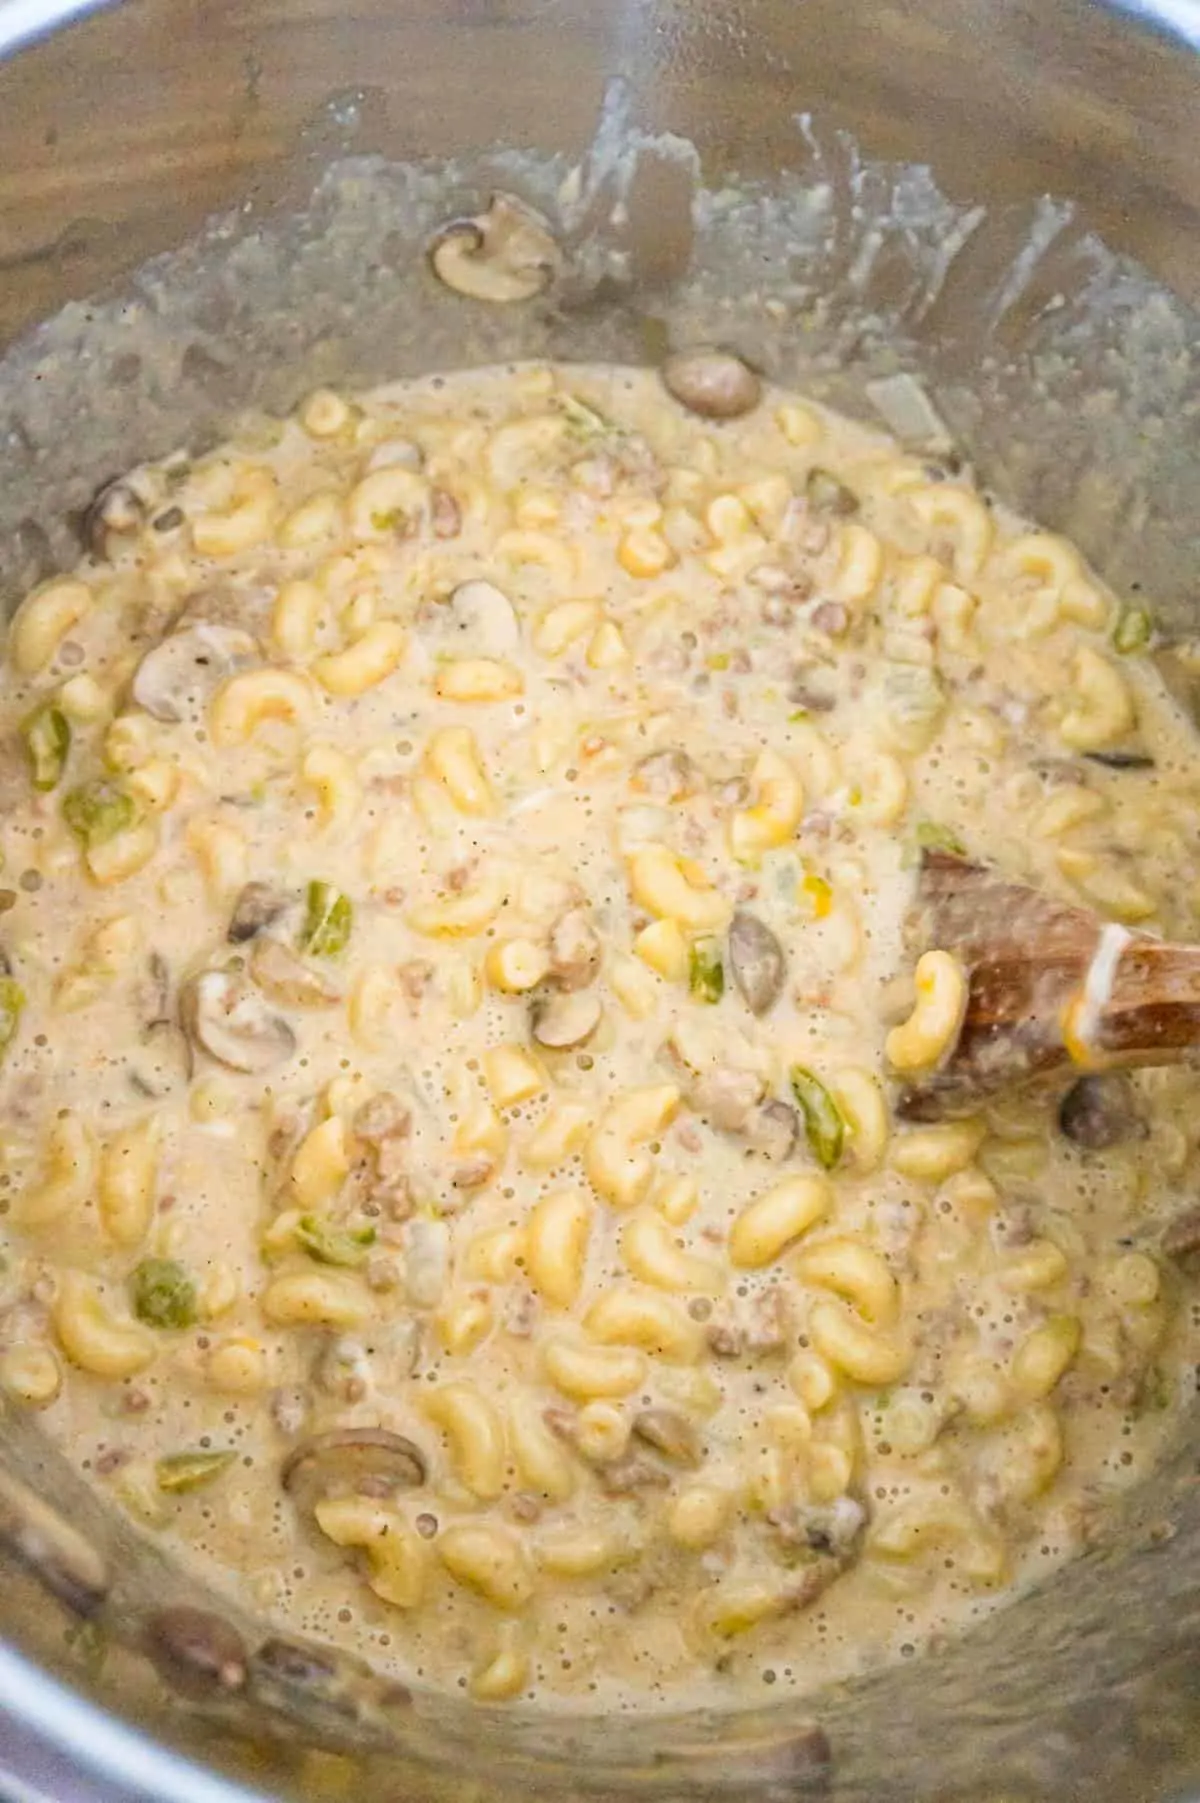 Instant Pot Philly Cheese Steak Pasta is a hearty pressure cooker macaroni recipe loaded with ground beef, green peppers, onions, mushrooms and cheese.